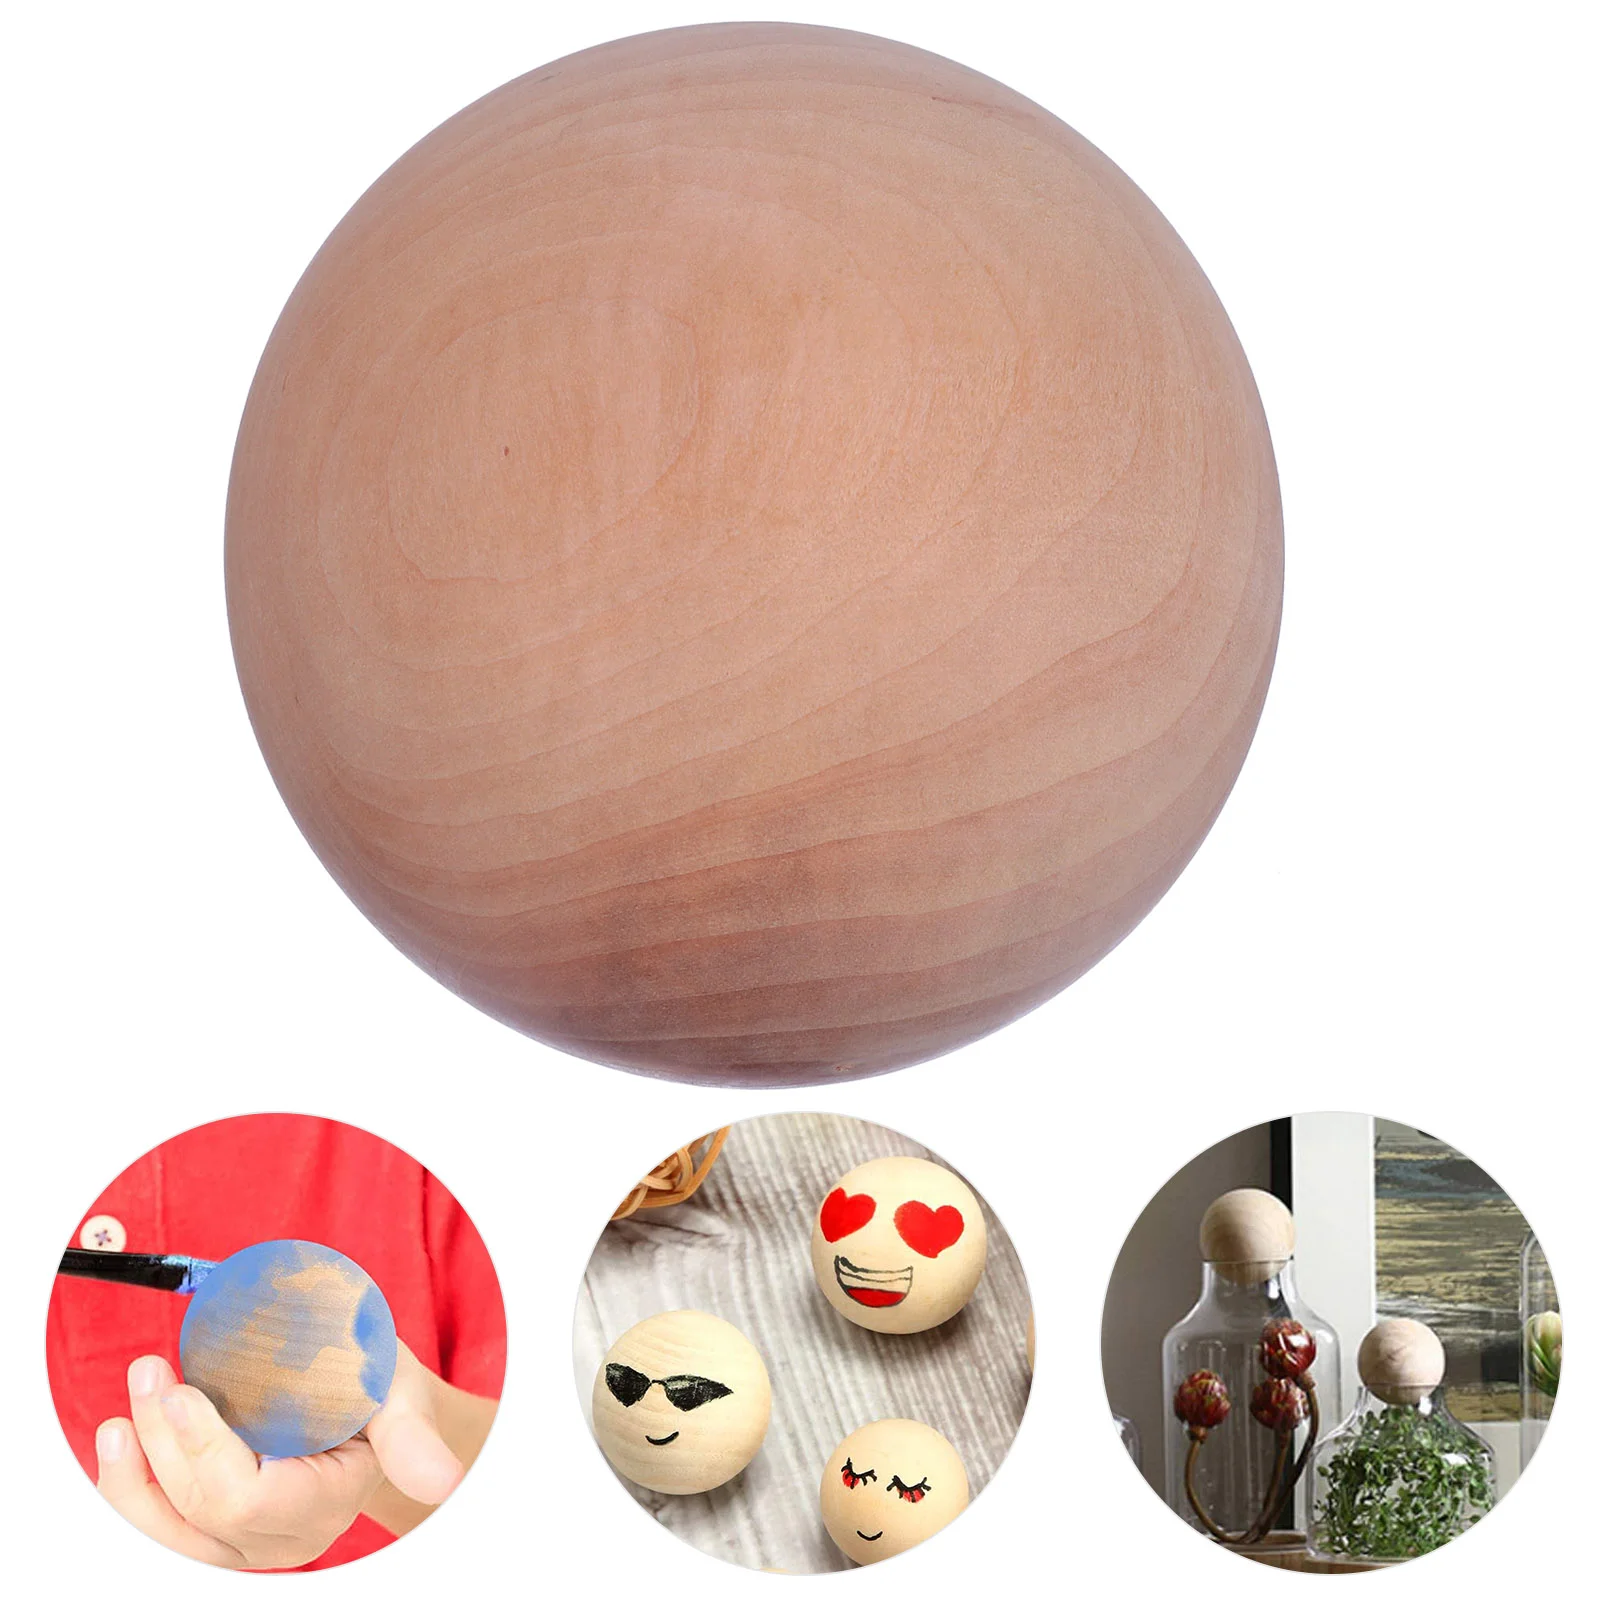 

9CM Wooden Round Unfinished Natural Round Hardwood Balls Smooth Birch Balls for Crafts And DIY Projects Wood Crafting Balls